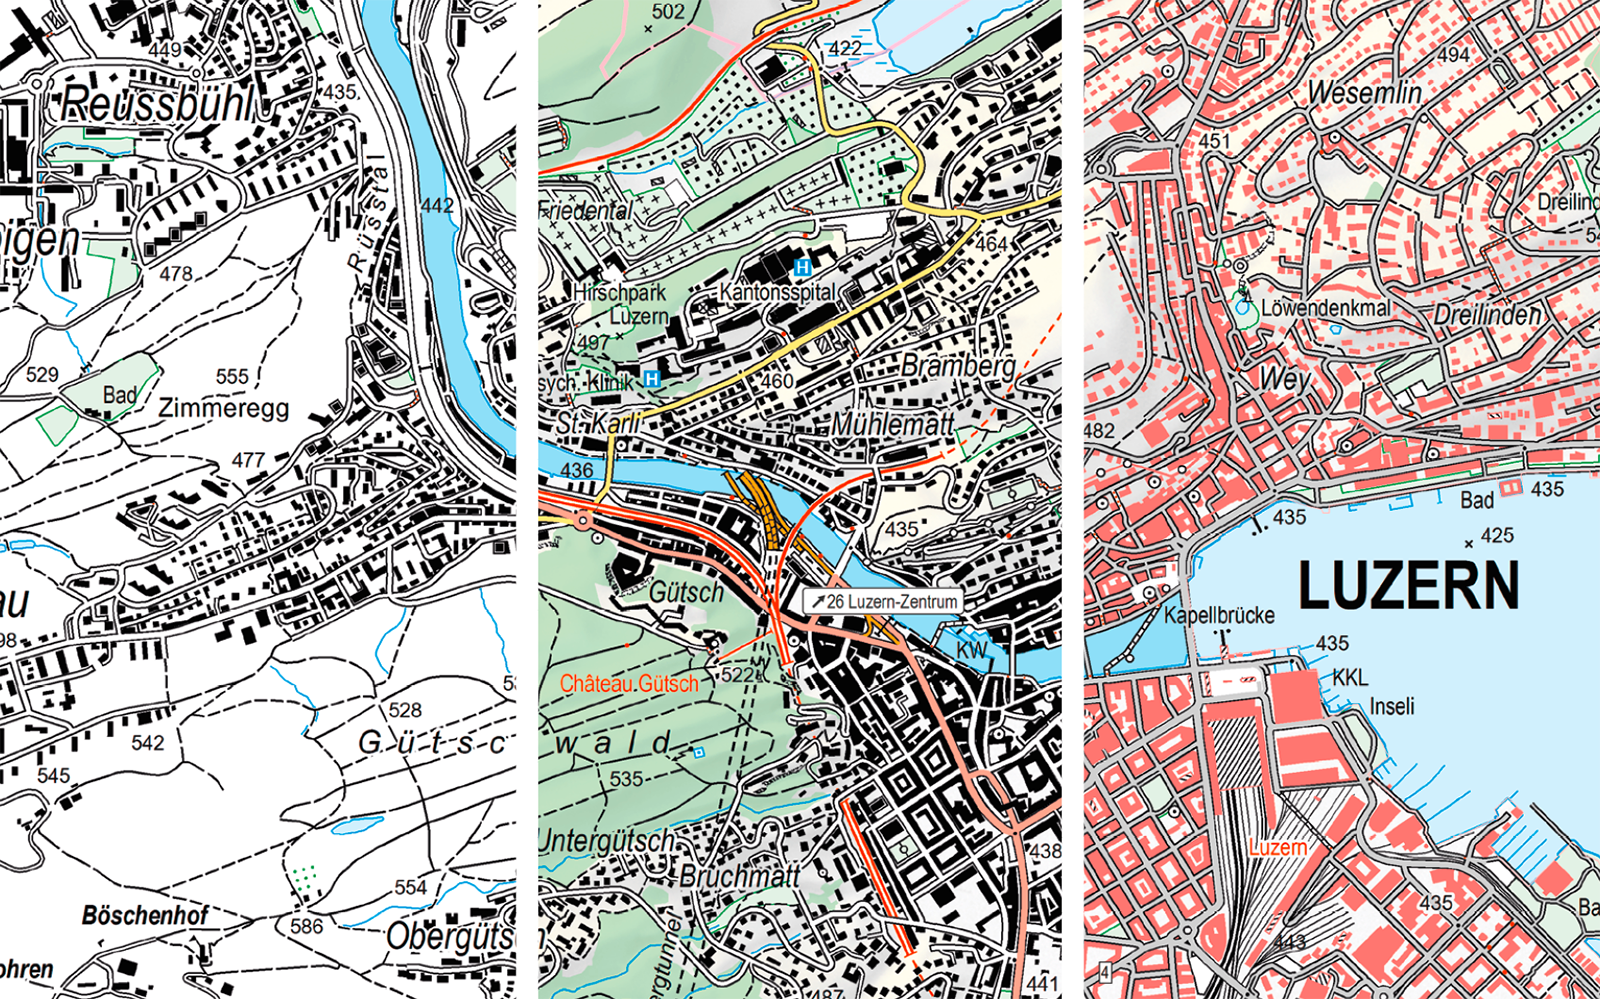 The image shows a section of the Swiss Map Vector 25 map of the city of Lucerne.